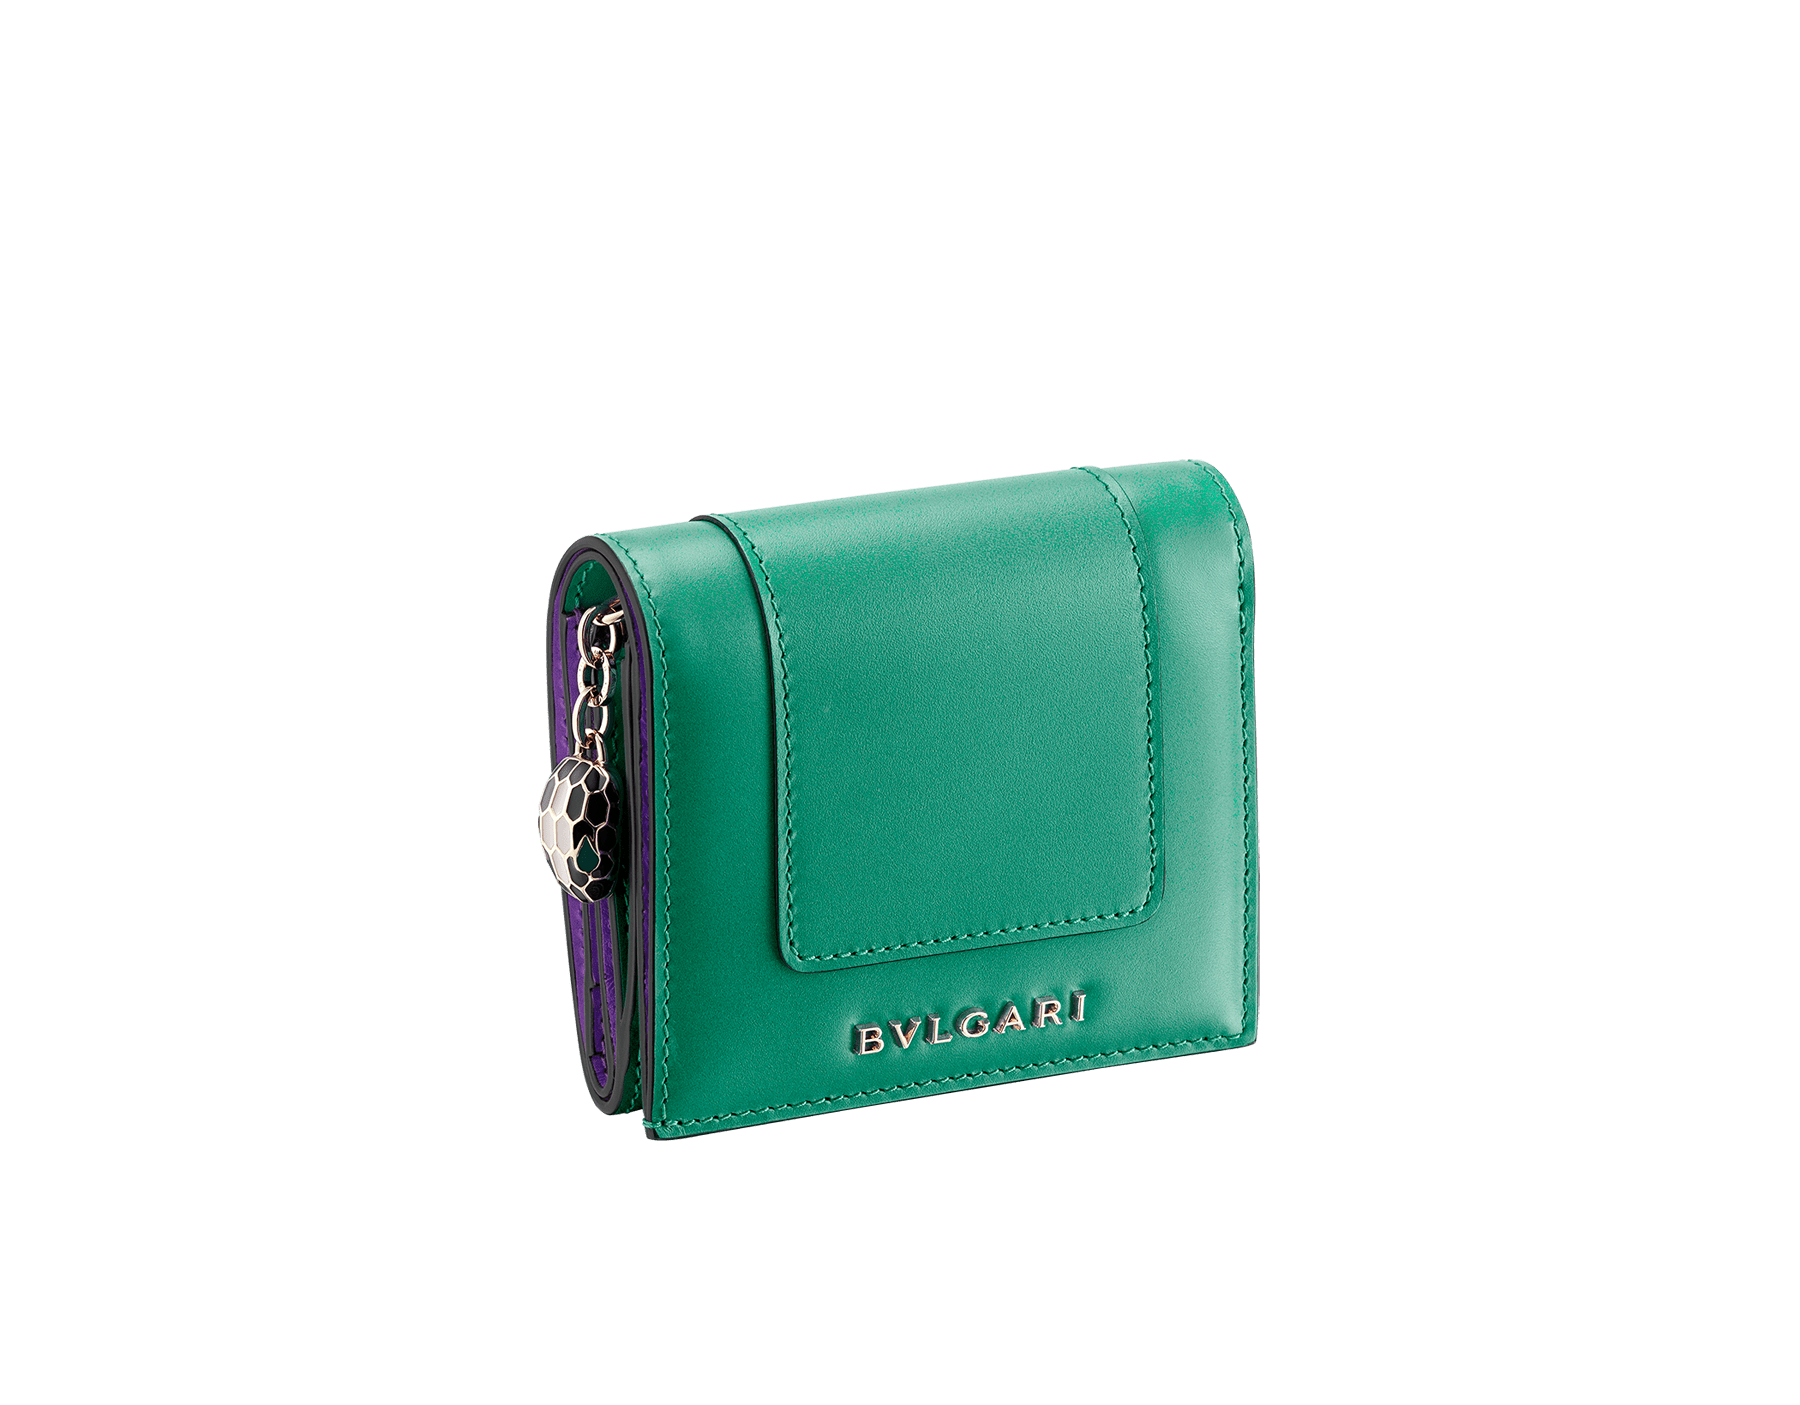 Serpenti Forever super compact wallet in black and emerald calf leather. Iconic snake head zip puller in black and white enamel, with green malachite enamel eyes. SEA-SUPERCOMPACT-CLb image 1